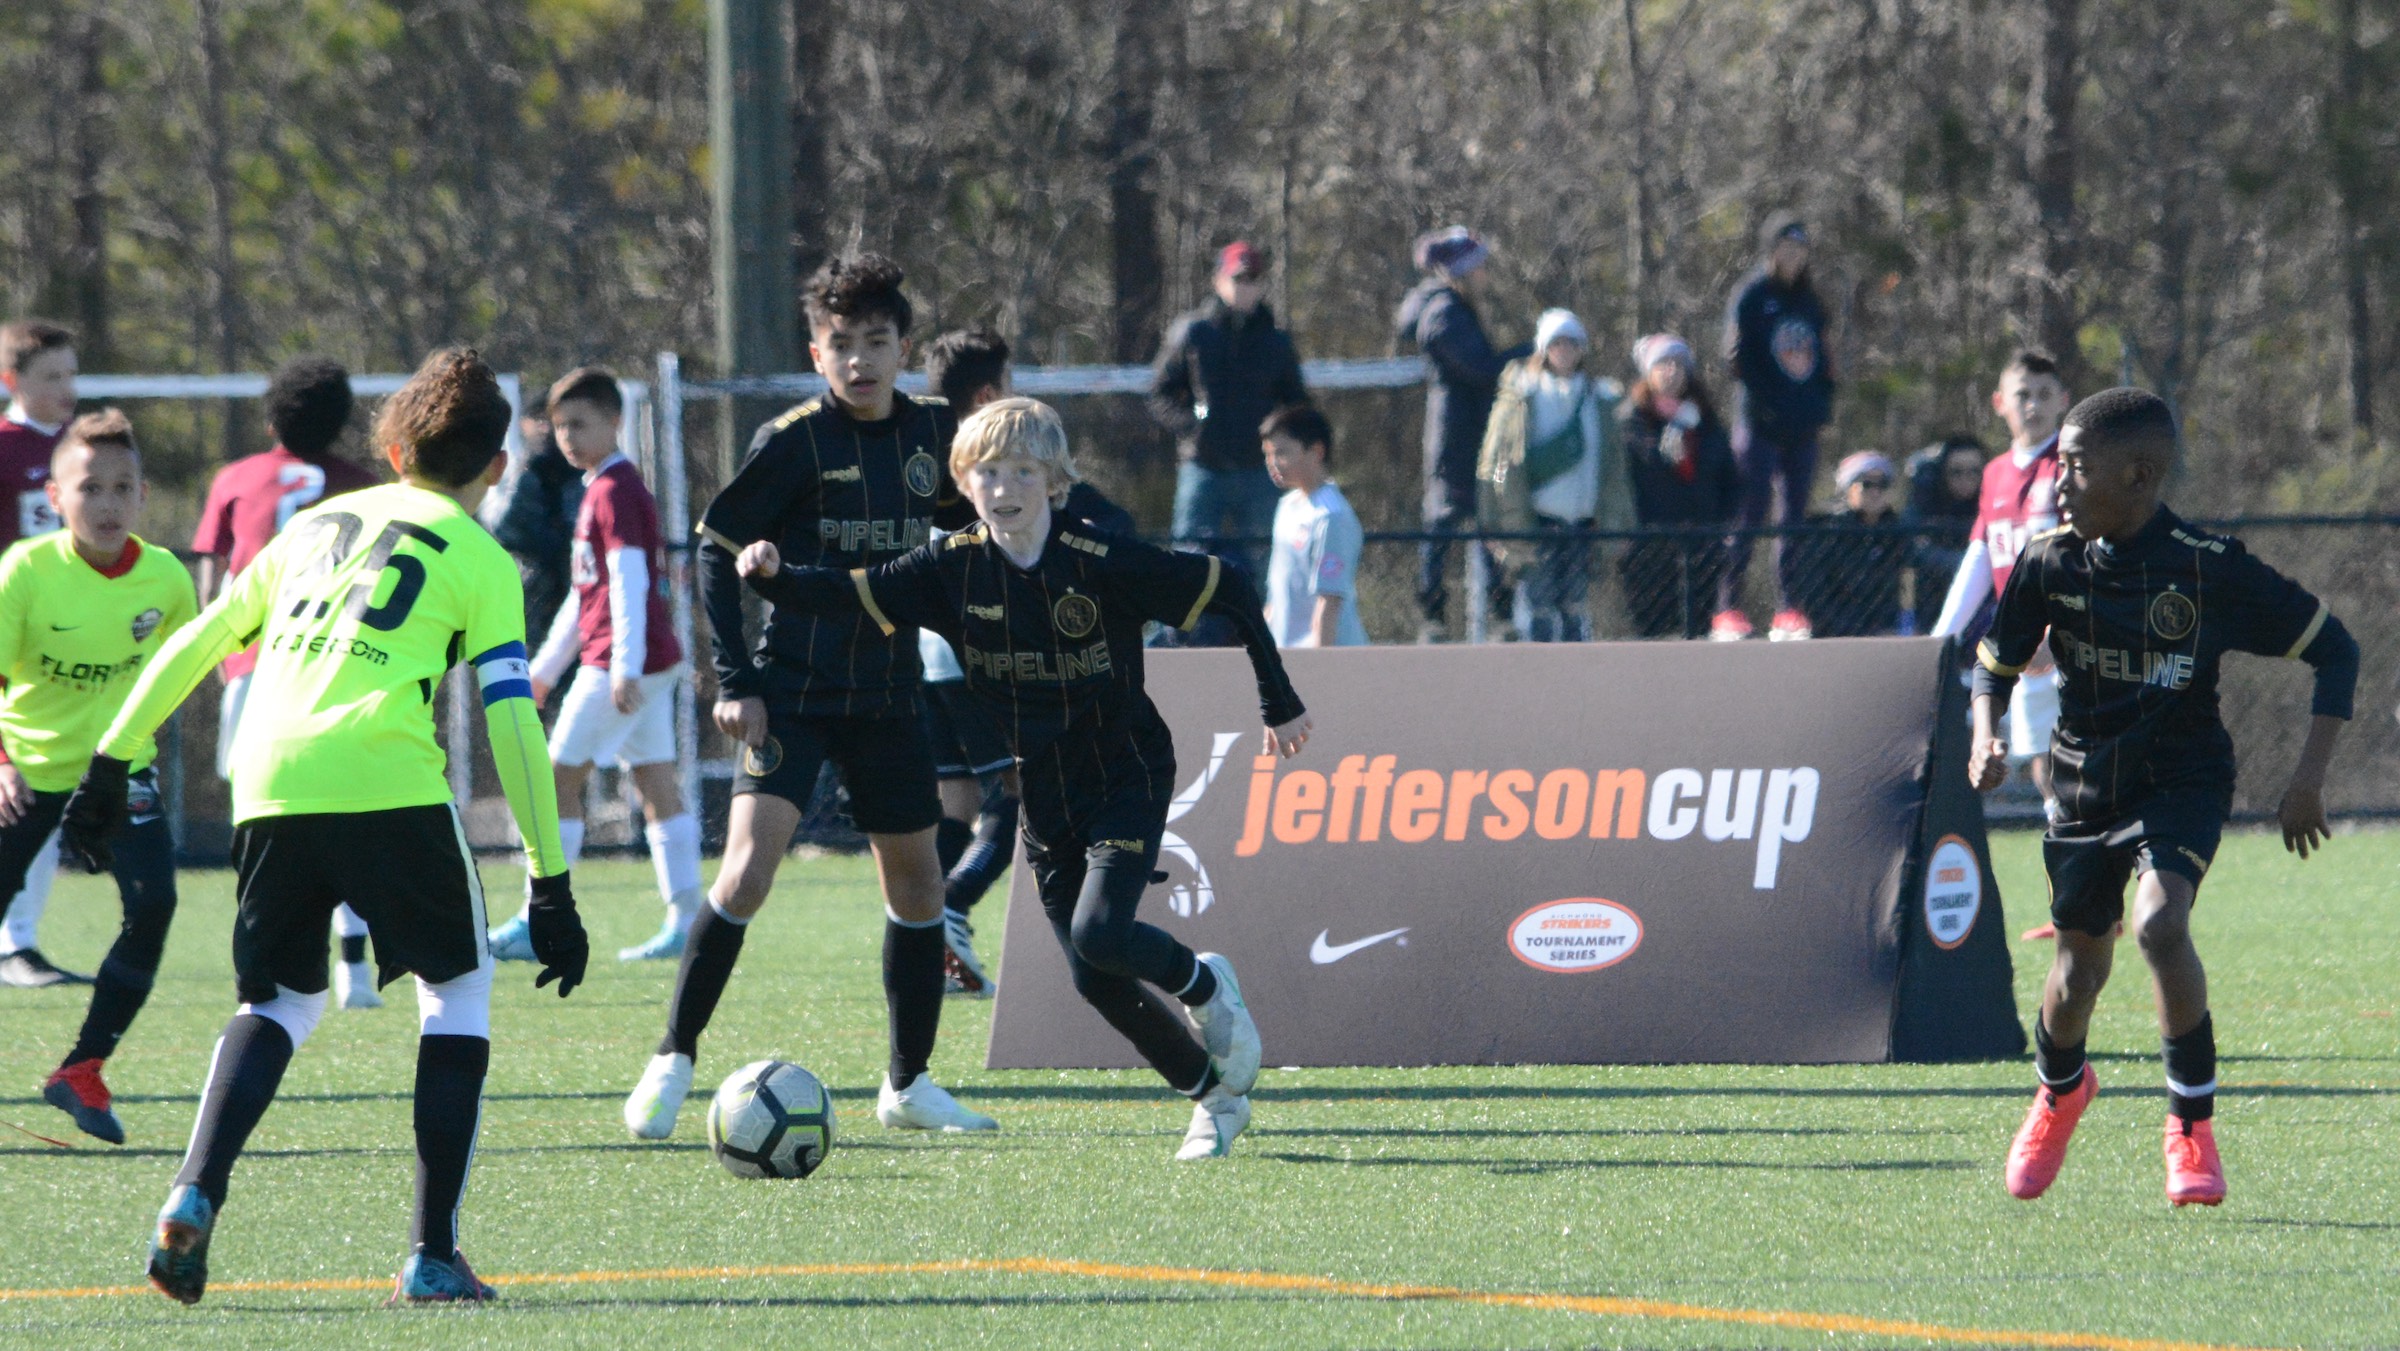 Champions crowned at 2020 Jefferson Cup U10U15 Boys Weekend SoccerWire